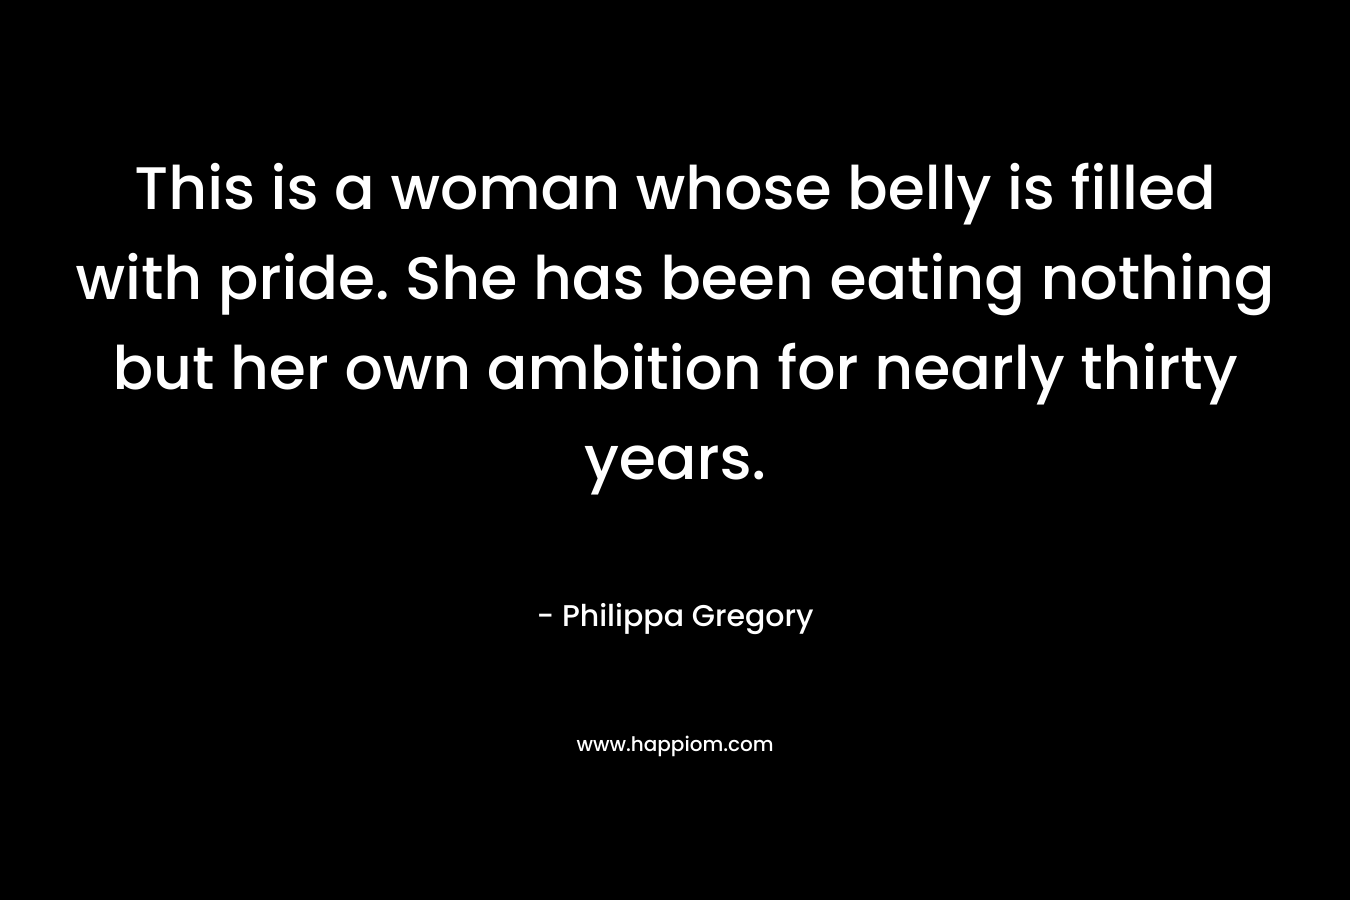 This is a woman whose belly is filled with pride. She has been eating nothing but her own ambition for nearly thirty years.